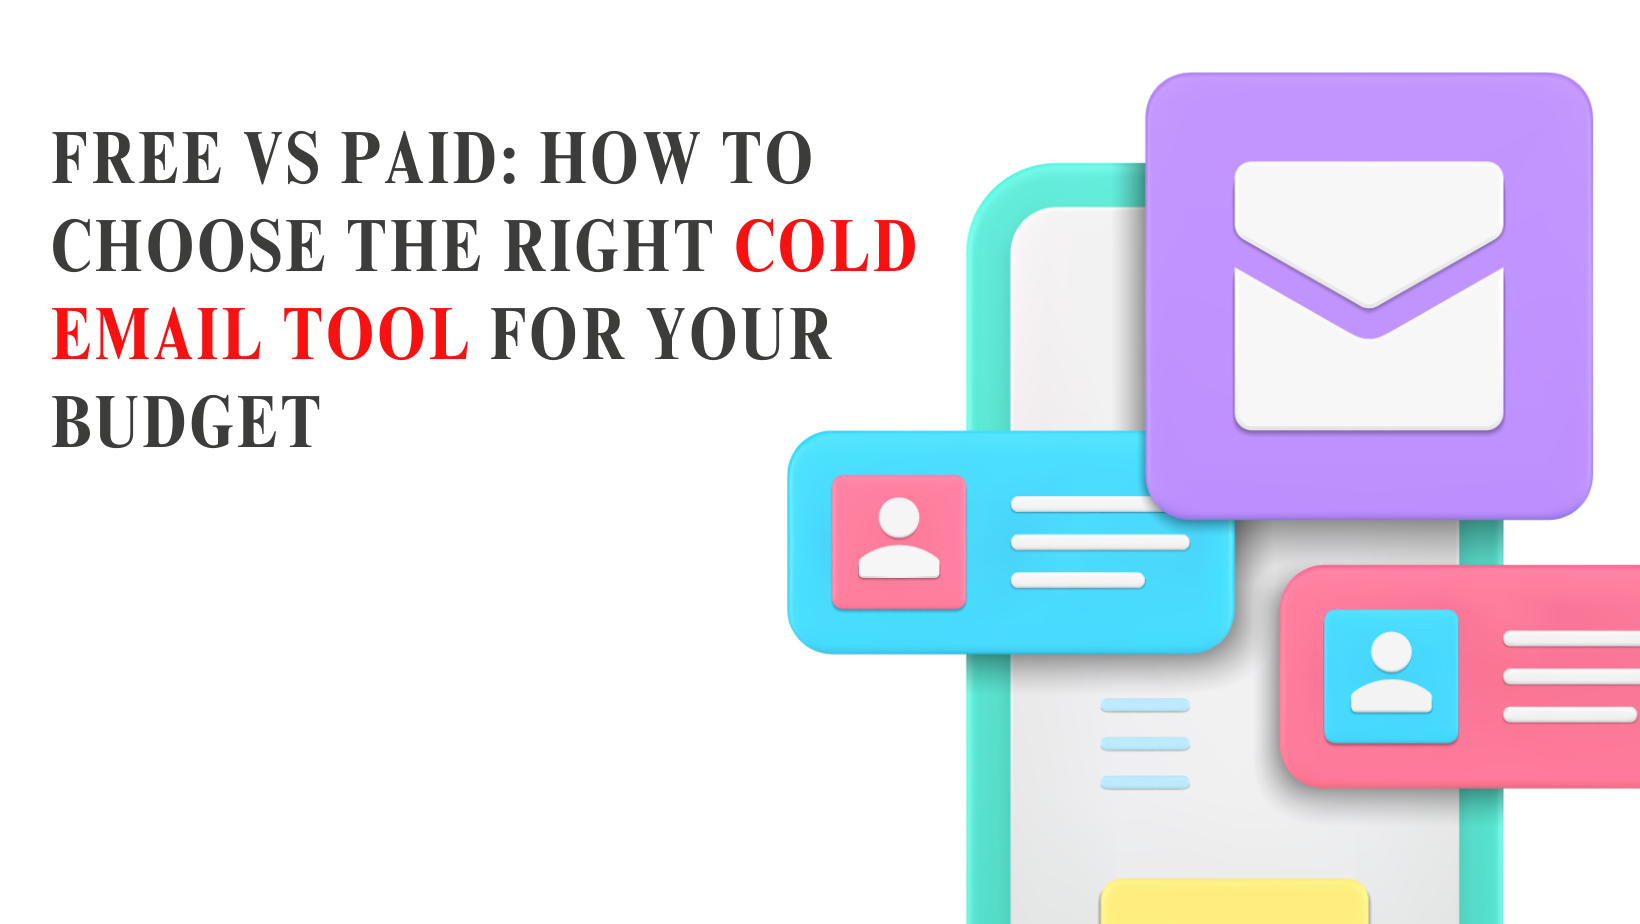 Free vs Paid: How to Choose the Right Cold Email Tool for Your Budget